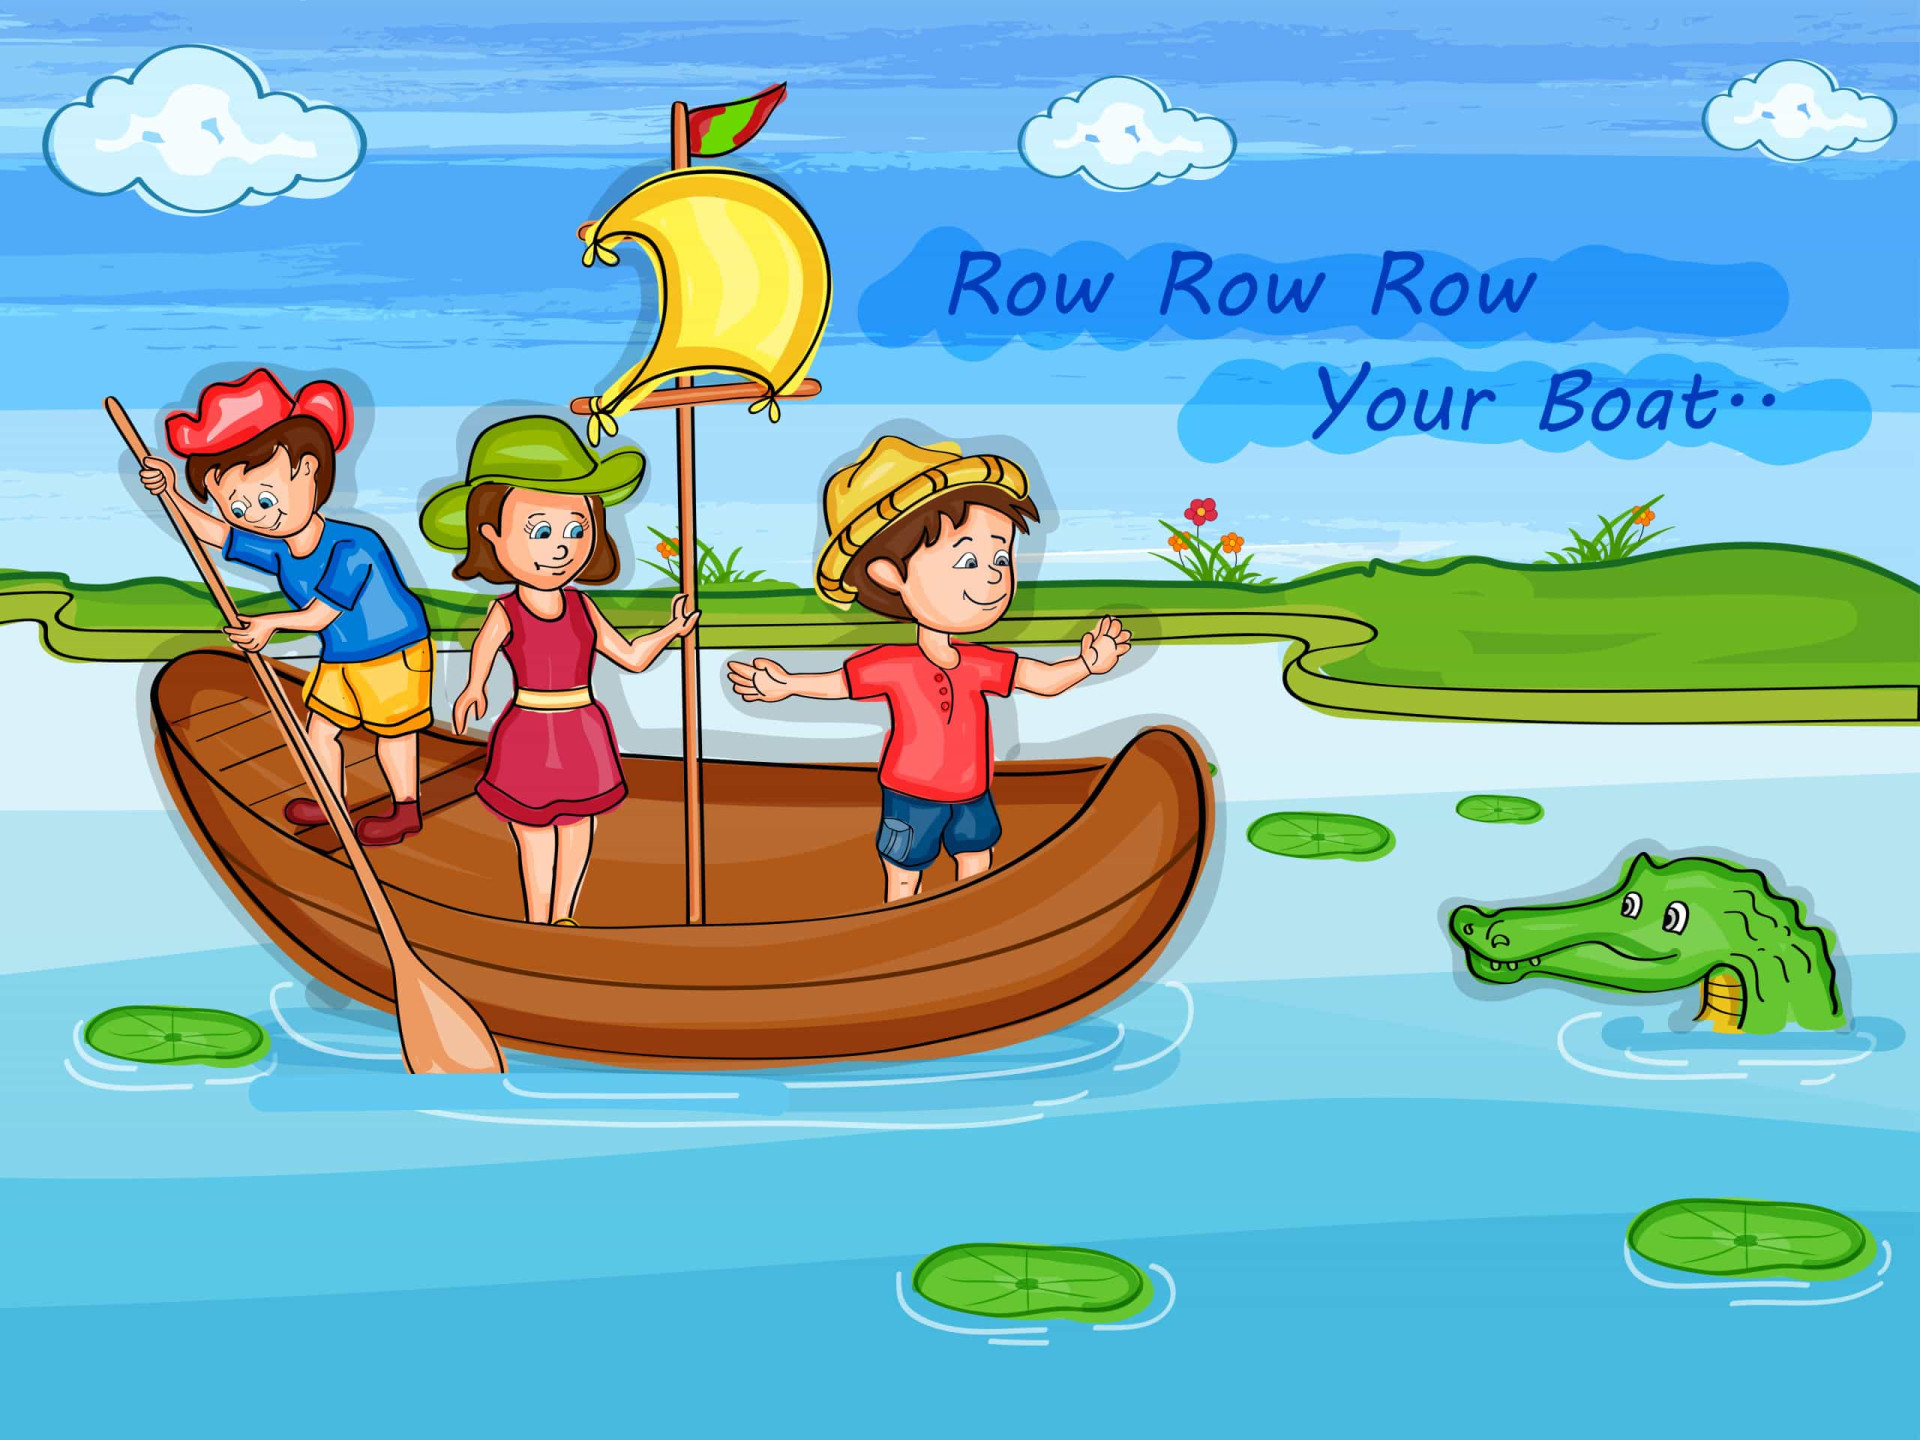 <p>'Row, Row, Row Your Boat' is another winner when it comes to singing along. Kids love repetition and simplicity, especially if done in a soothing manner, like in this song. </p><p>You may also like:<a href="https://www.starsinsider.com/n/463498?utm_source=msn.com&utm_medium=display&utm_campaign=referral_description&utm_content=498954v1en-us"> These celebs can't keep their tongues in their mouths </a></p>